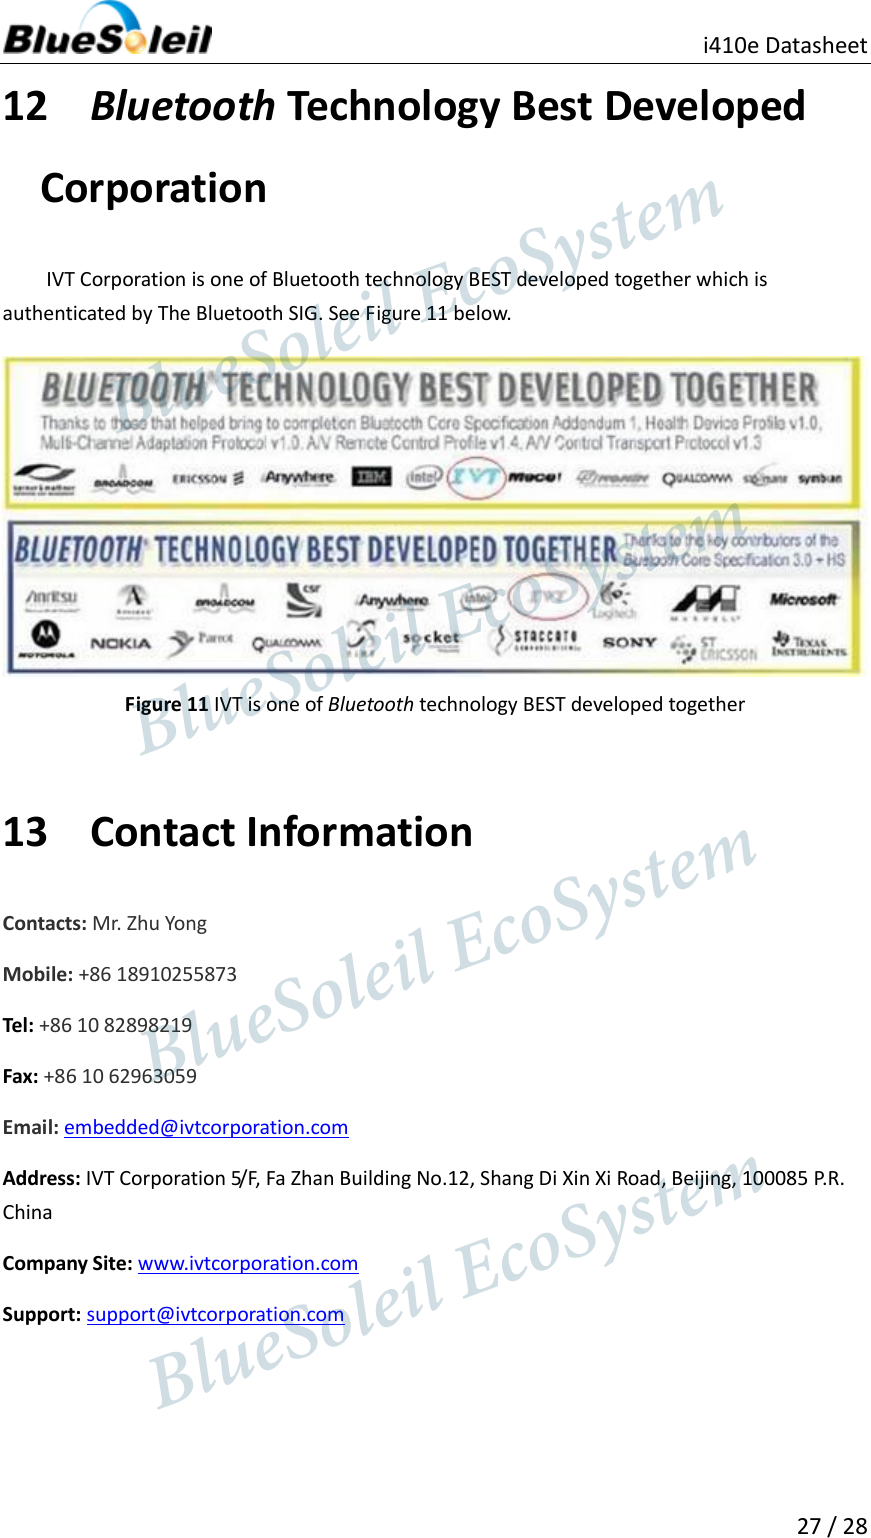                                               i410e Datasheet  27 / 28  12 Bluetooth Technology Best Developed Corporation IVT Corporation is one of Bluetooth technology BEST developed together which is authenticated by The Bluetooth SIG. See Figure 11 below.    Figure 11 IVT is one of Bluetooth technology BEST developed together  13 Contact Information Contacts: Mr. Zhu Yong Mobile: +86 18910255873 Tel: +86 10 82898219 Fax: +86 10 62963059 Email: embedded@ivtcorporation.com   Address: IVT Corporation 5/F, Fa Zhan Building No.12, Shang Di Xin Xi Road, Beijing, 100085 P.R. China Company Site: www.ivtcorporation.com Support: support@ivtcorporation.com                   BlueSoleil EcoSystem            BlueSoleil EcoSystem      BlueSoleil EcoSystemBlueSoleil EcoSystem